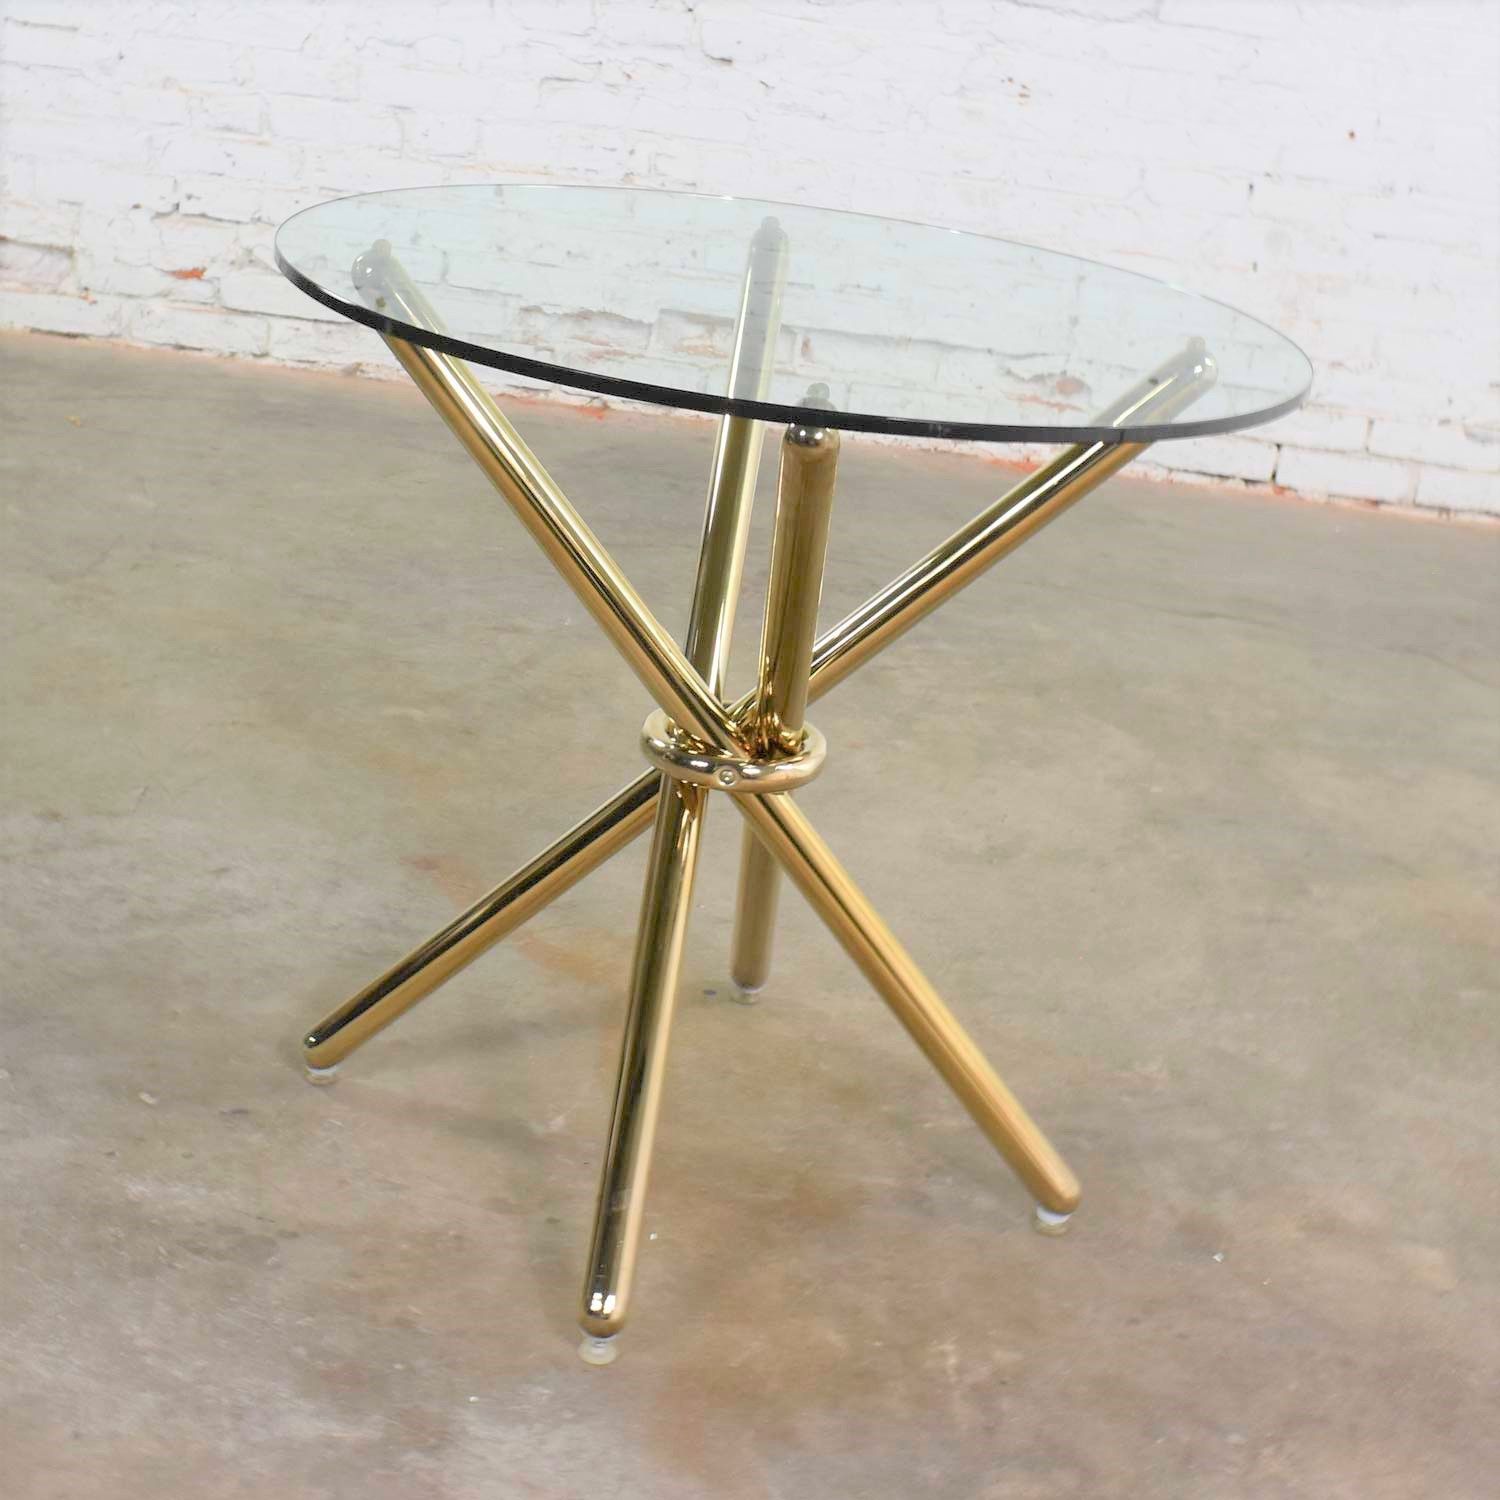 Vintage Modern Brass Plated Jax Center Or End Table With Round Glass Within Antique Brass Round Console Tables (View 4 of 20)